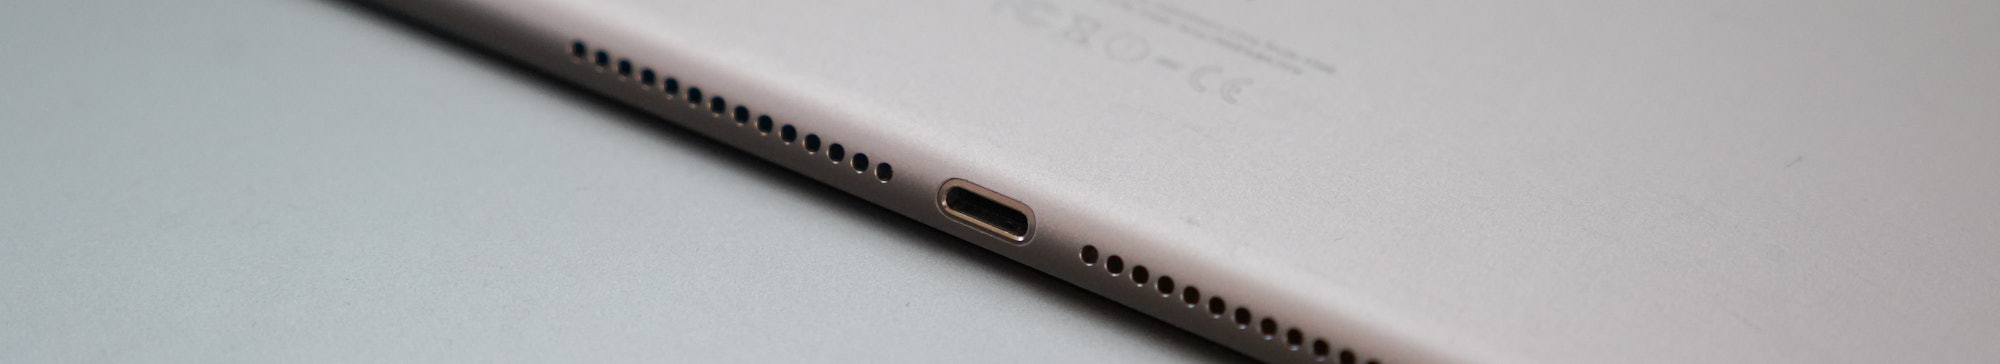 Report: 10.2-inch iPad switching from Lightning to USB-C port